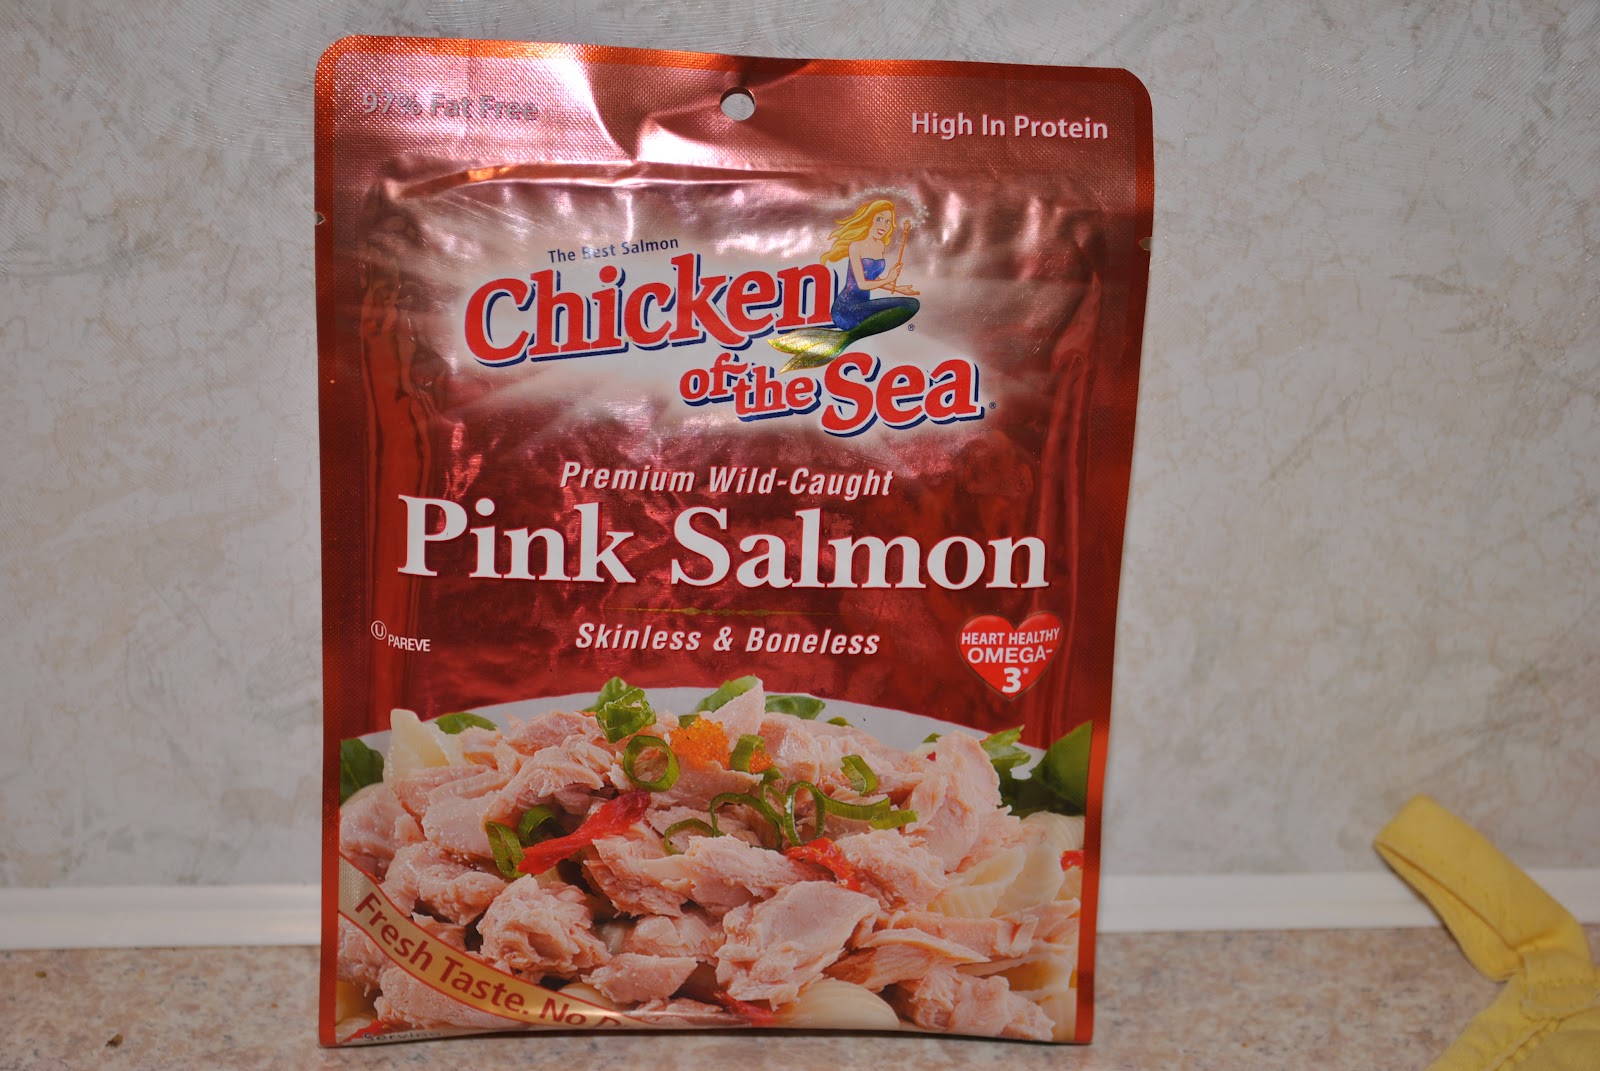 Honey Do's & Product Reviews: Product Review / Recipe Review: Chicken